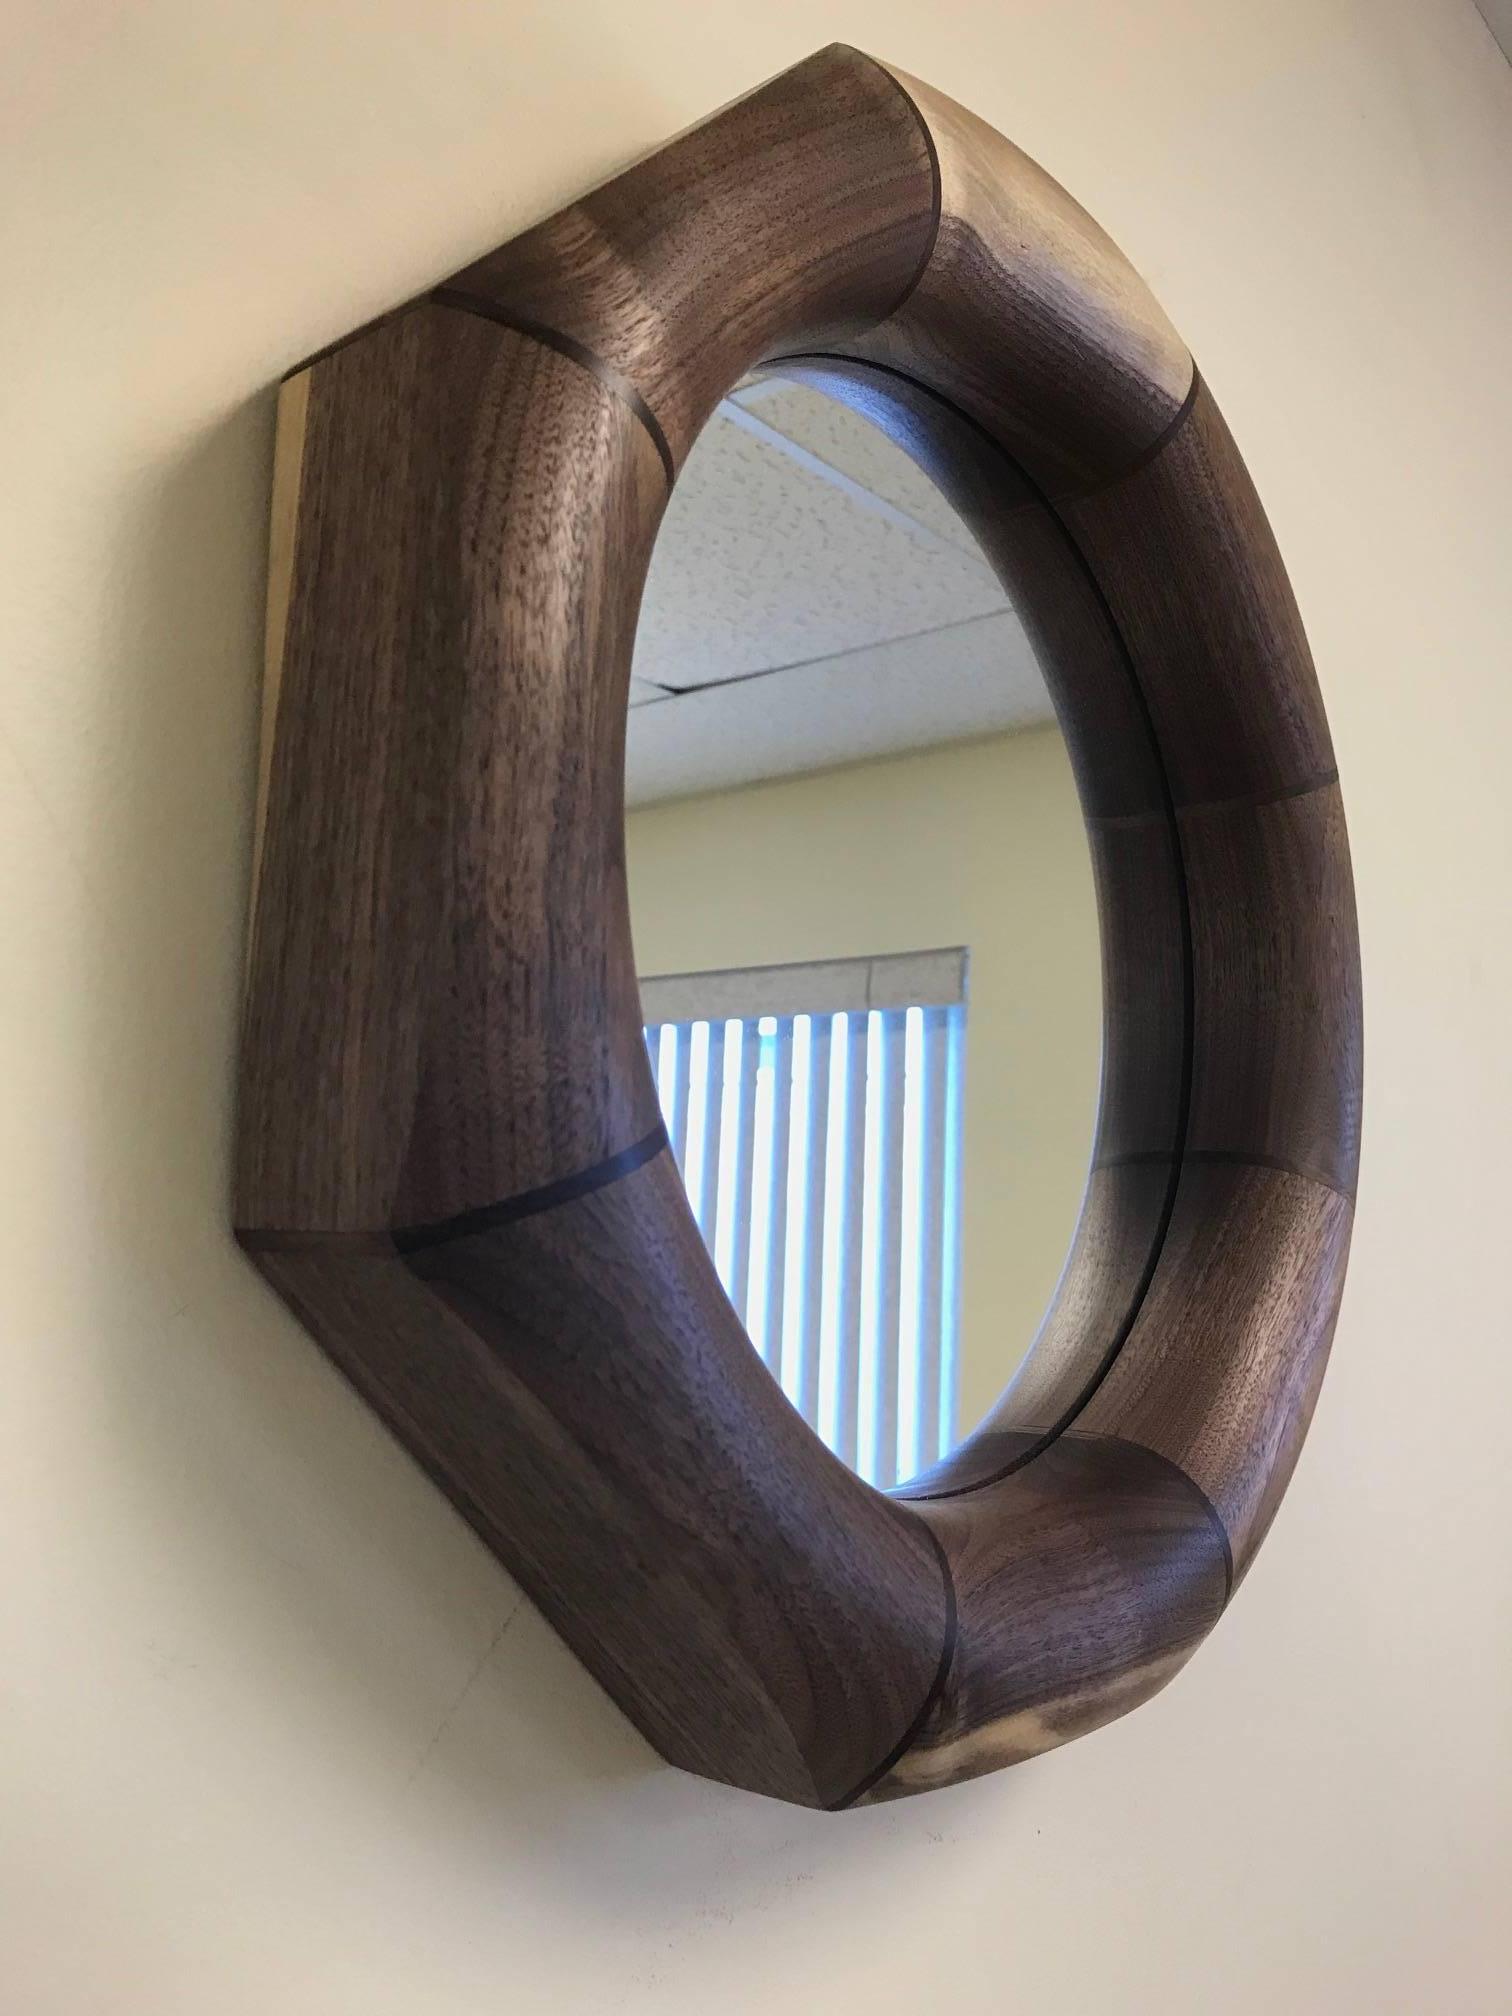 Custom solid walnut mirror with an octagonal shape.
The mirror listed is currently available.